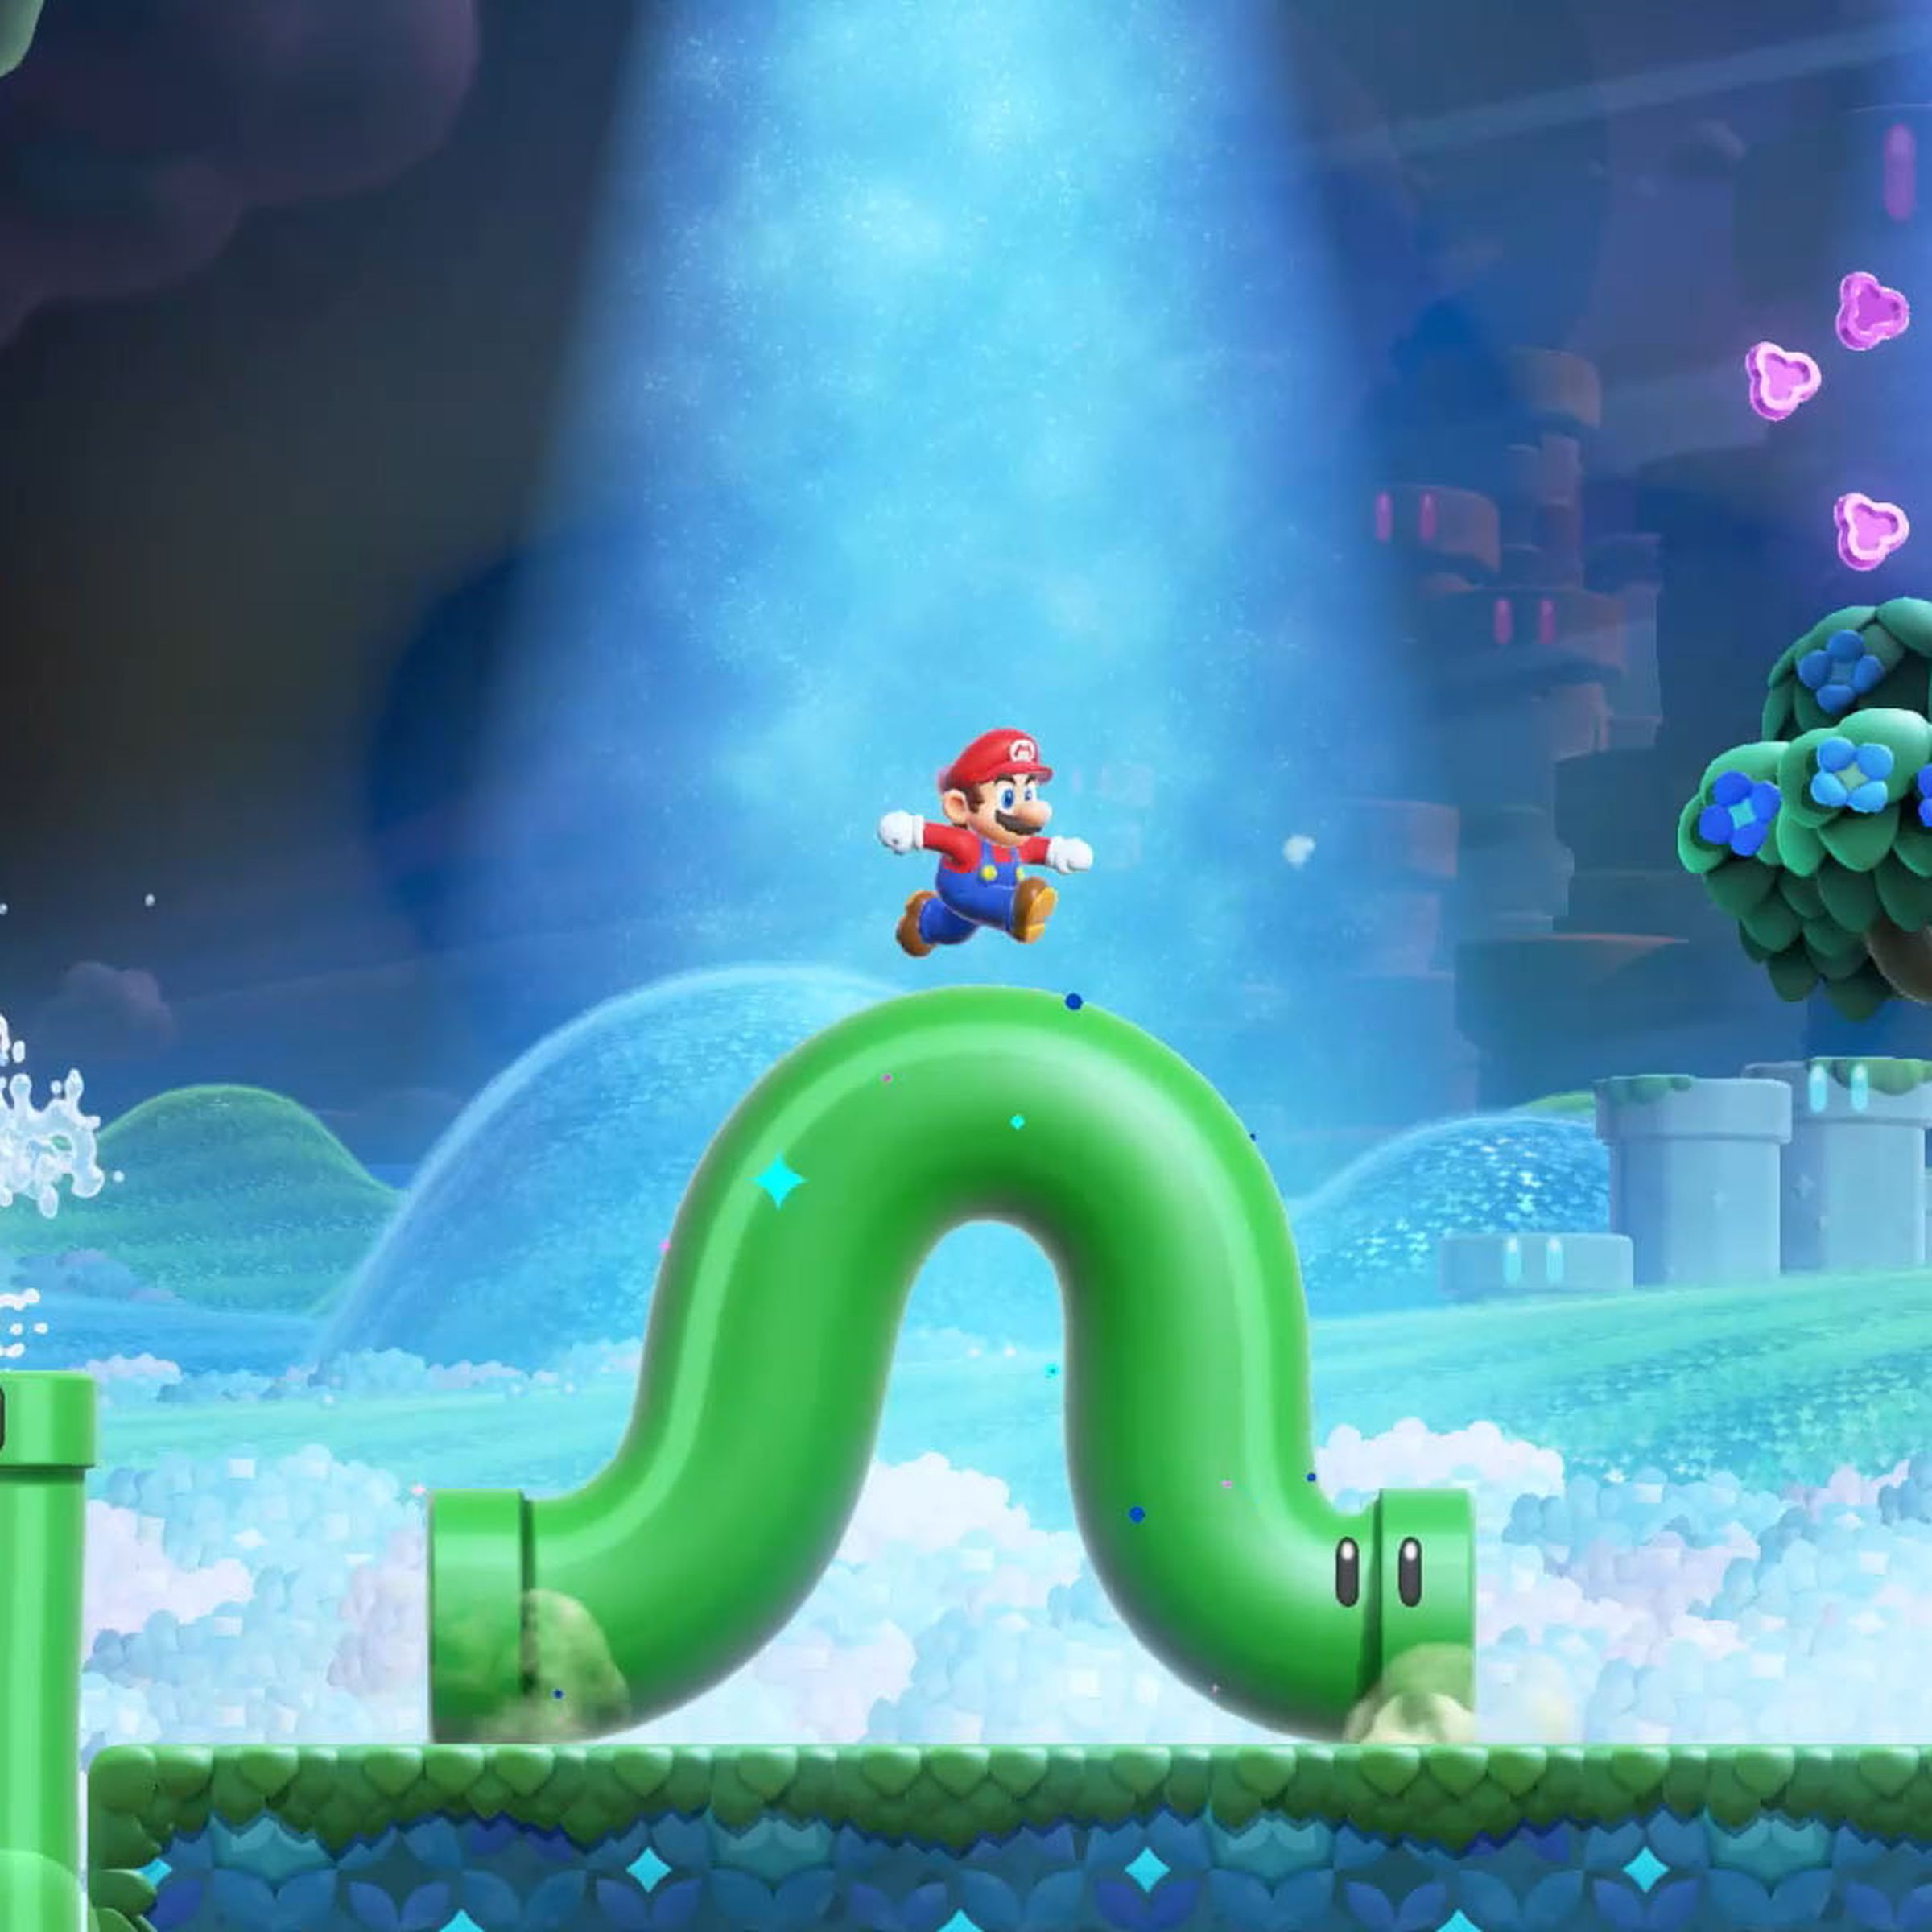 A screenshot from the video game Super Mario Bros. Wonder in which Mario stands on a wiggling green pipe in a surreal fantasy world.